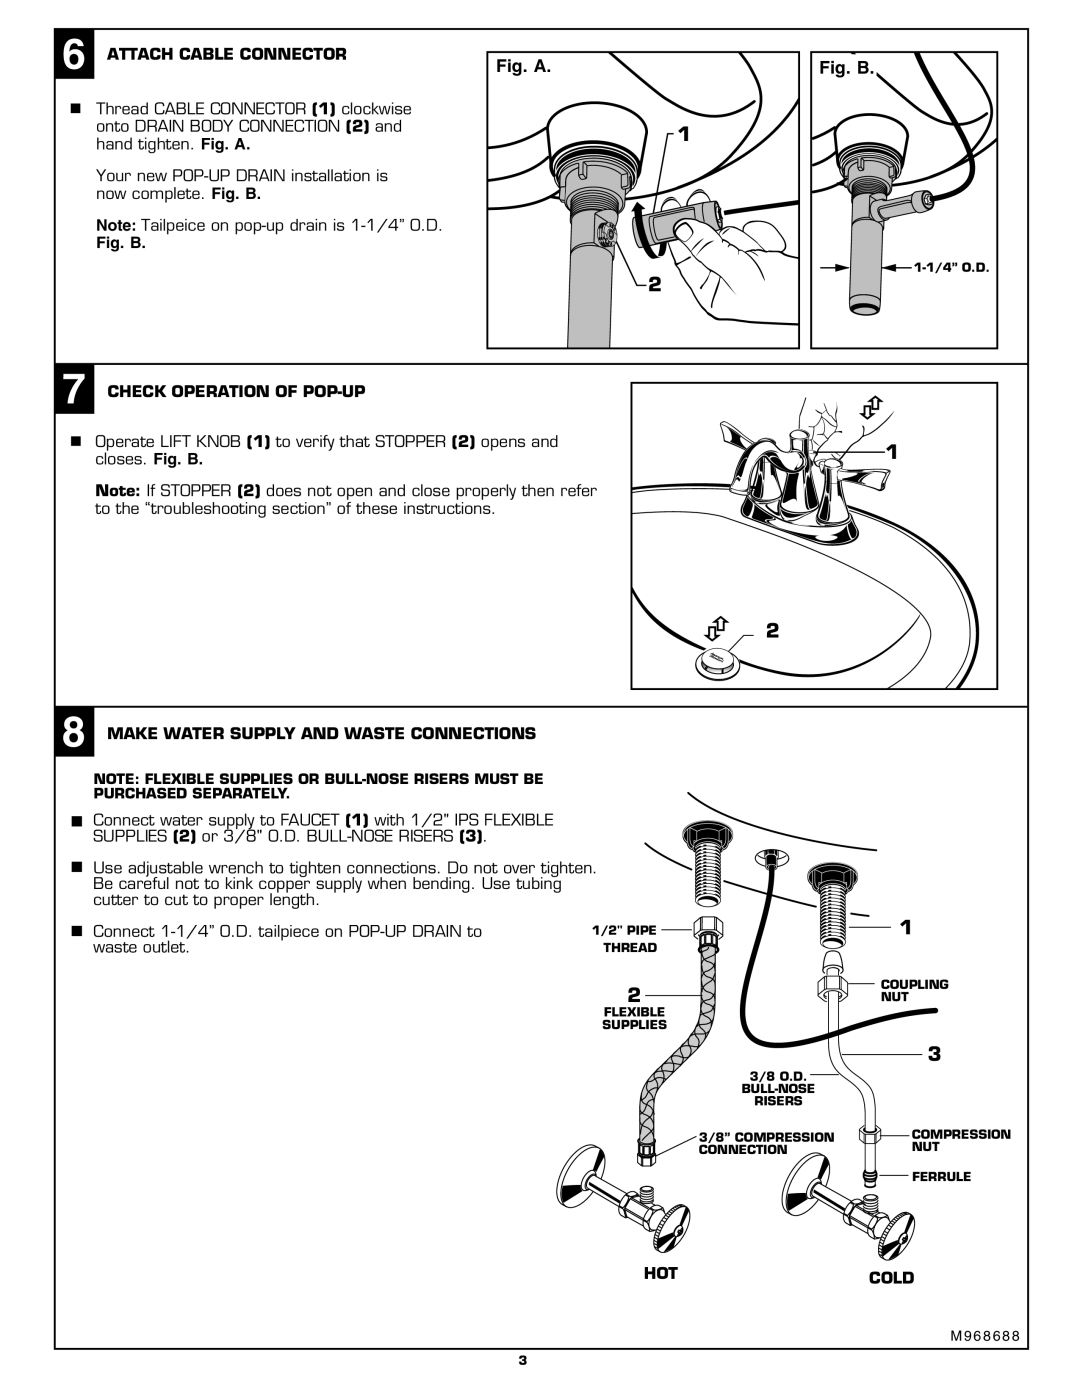 American Standard 6044.XXX Fig. A, Fig. B, Attach Cable Connector, 7CHECK OPERATION OF POP-UP, Hotcold 